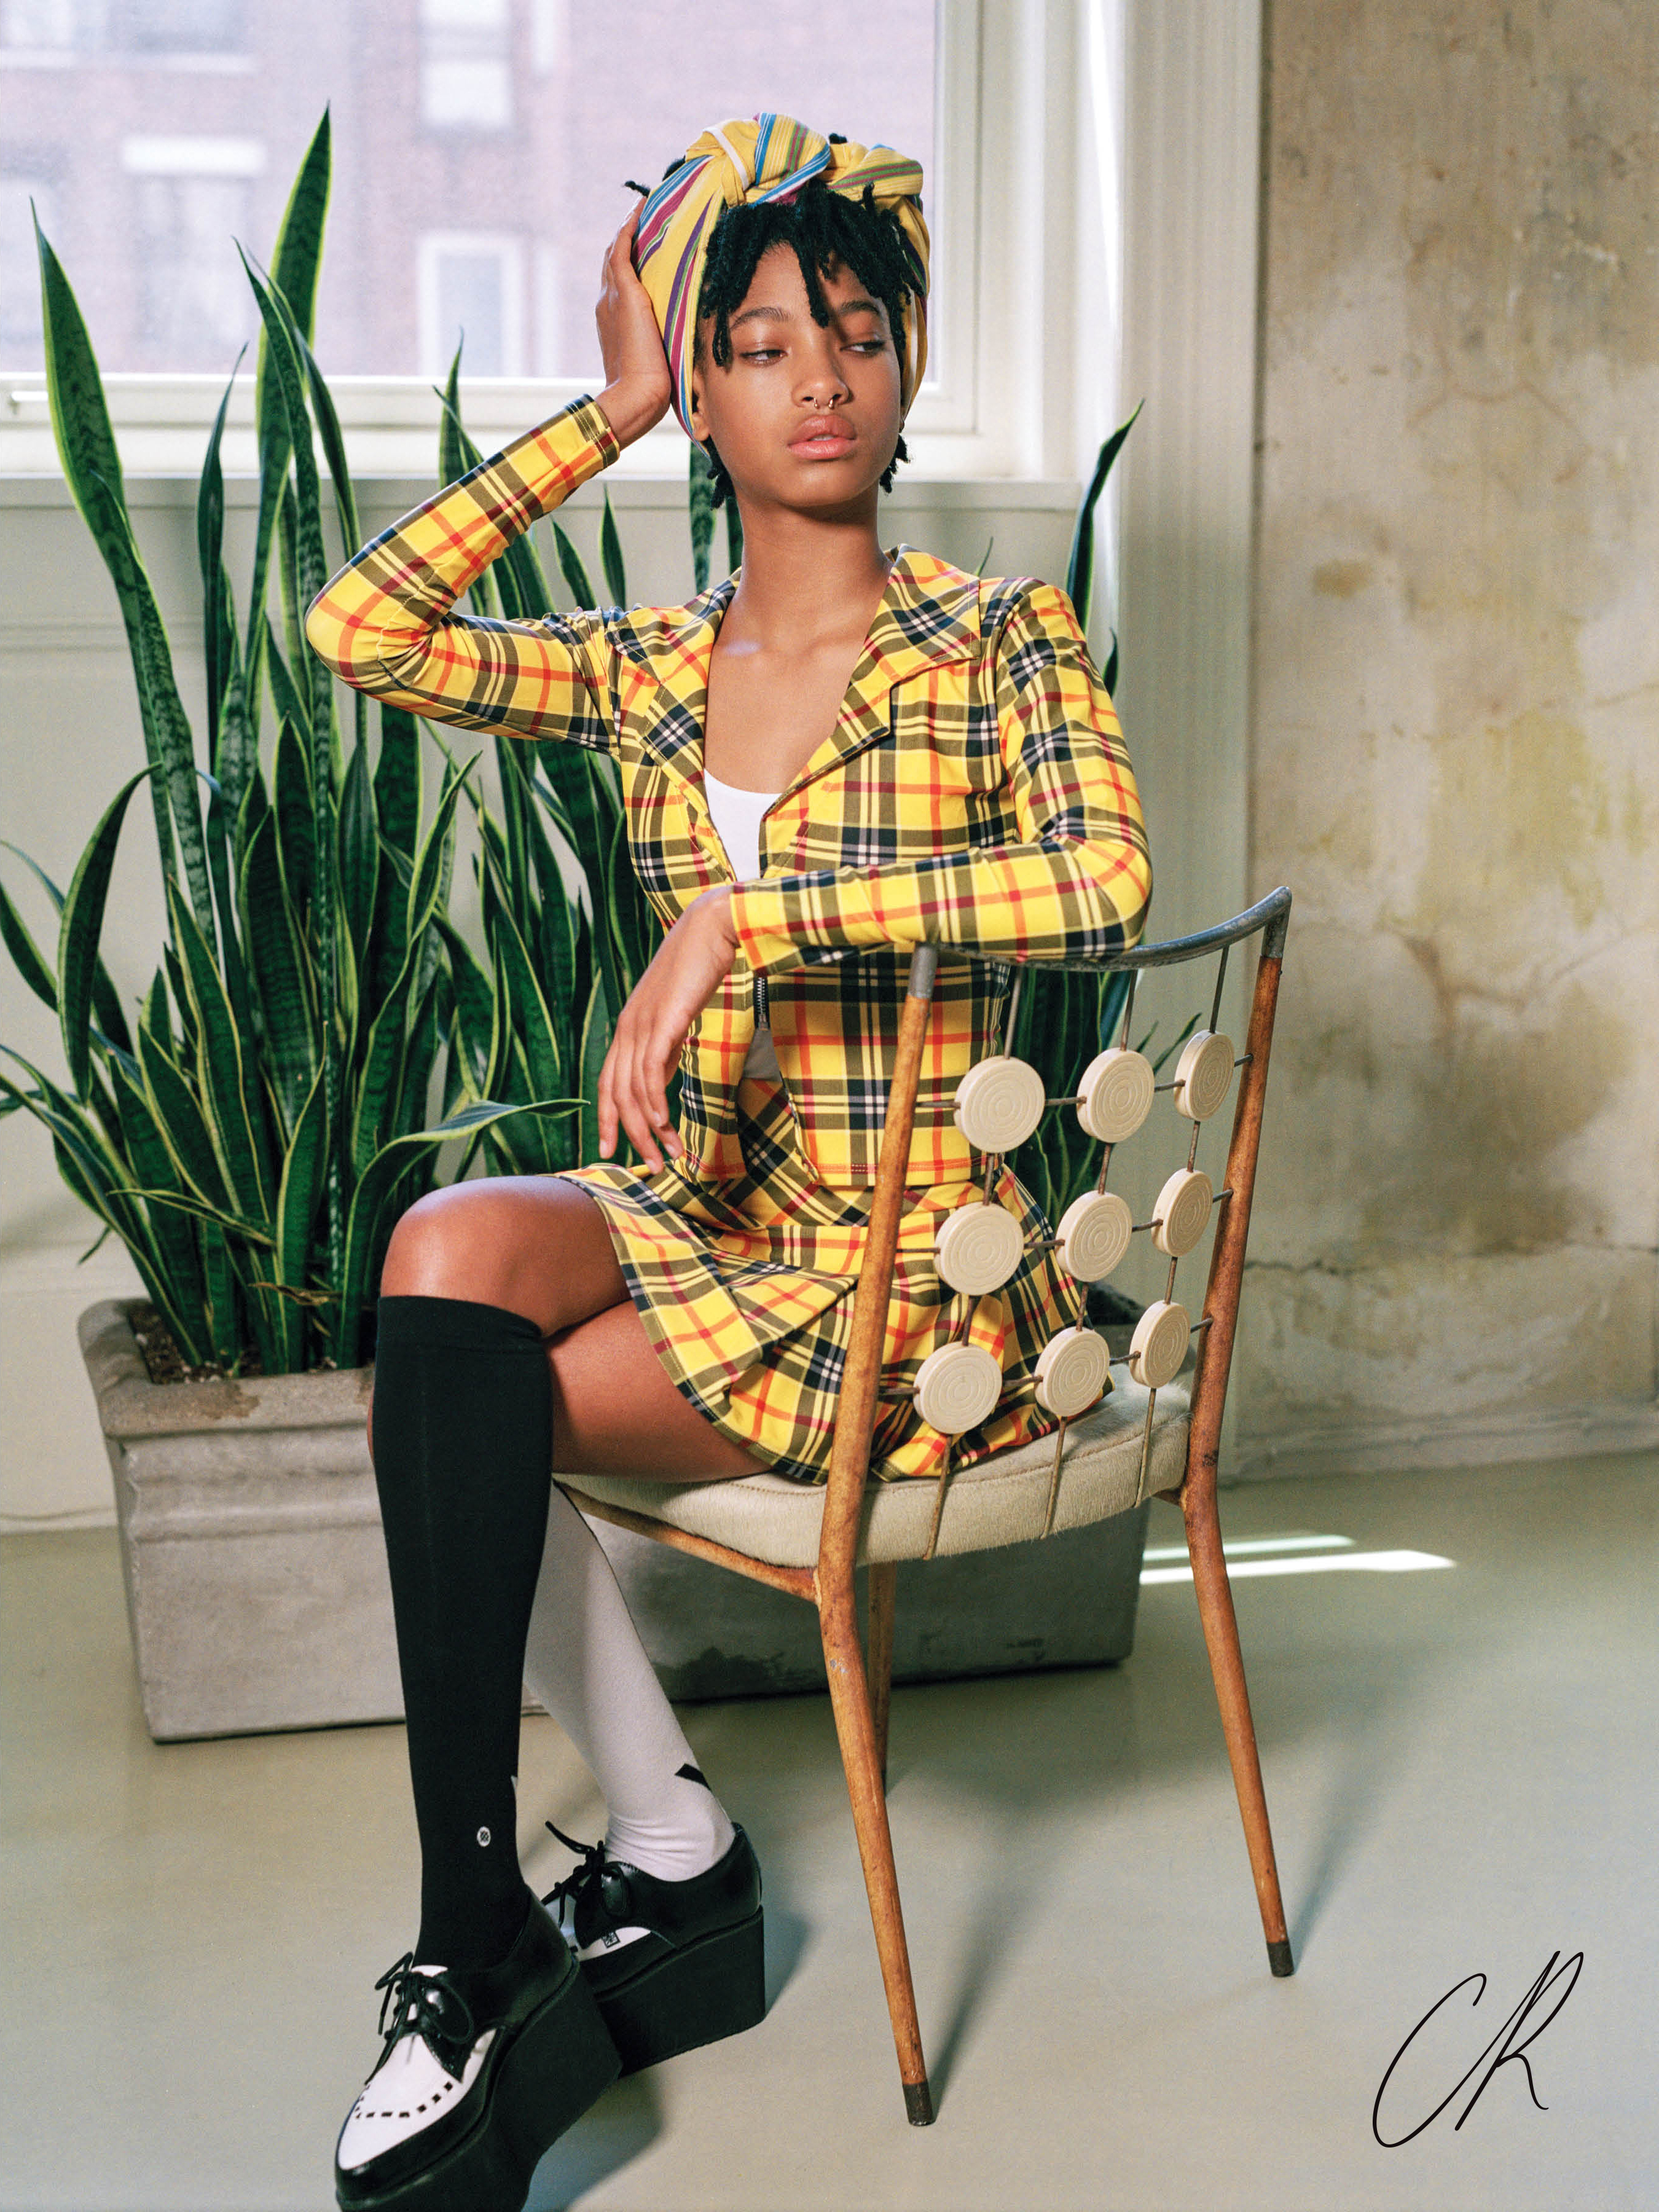 Willow Smith Channels Cher From 'Clueless': Pic